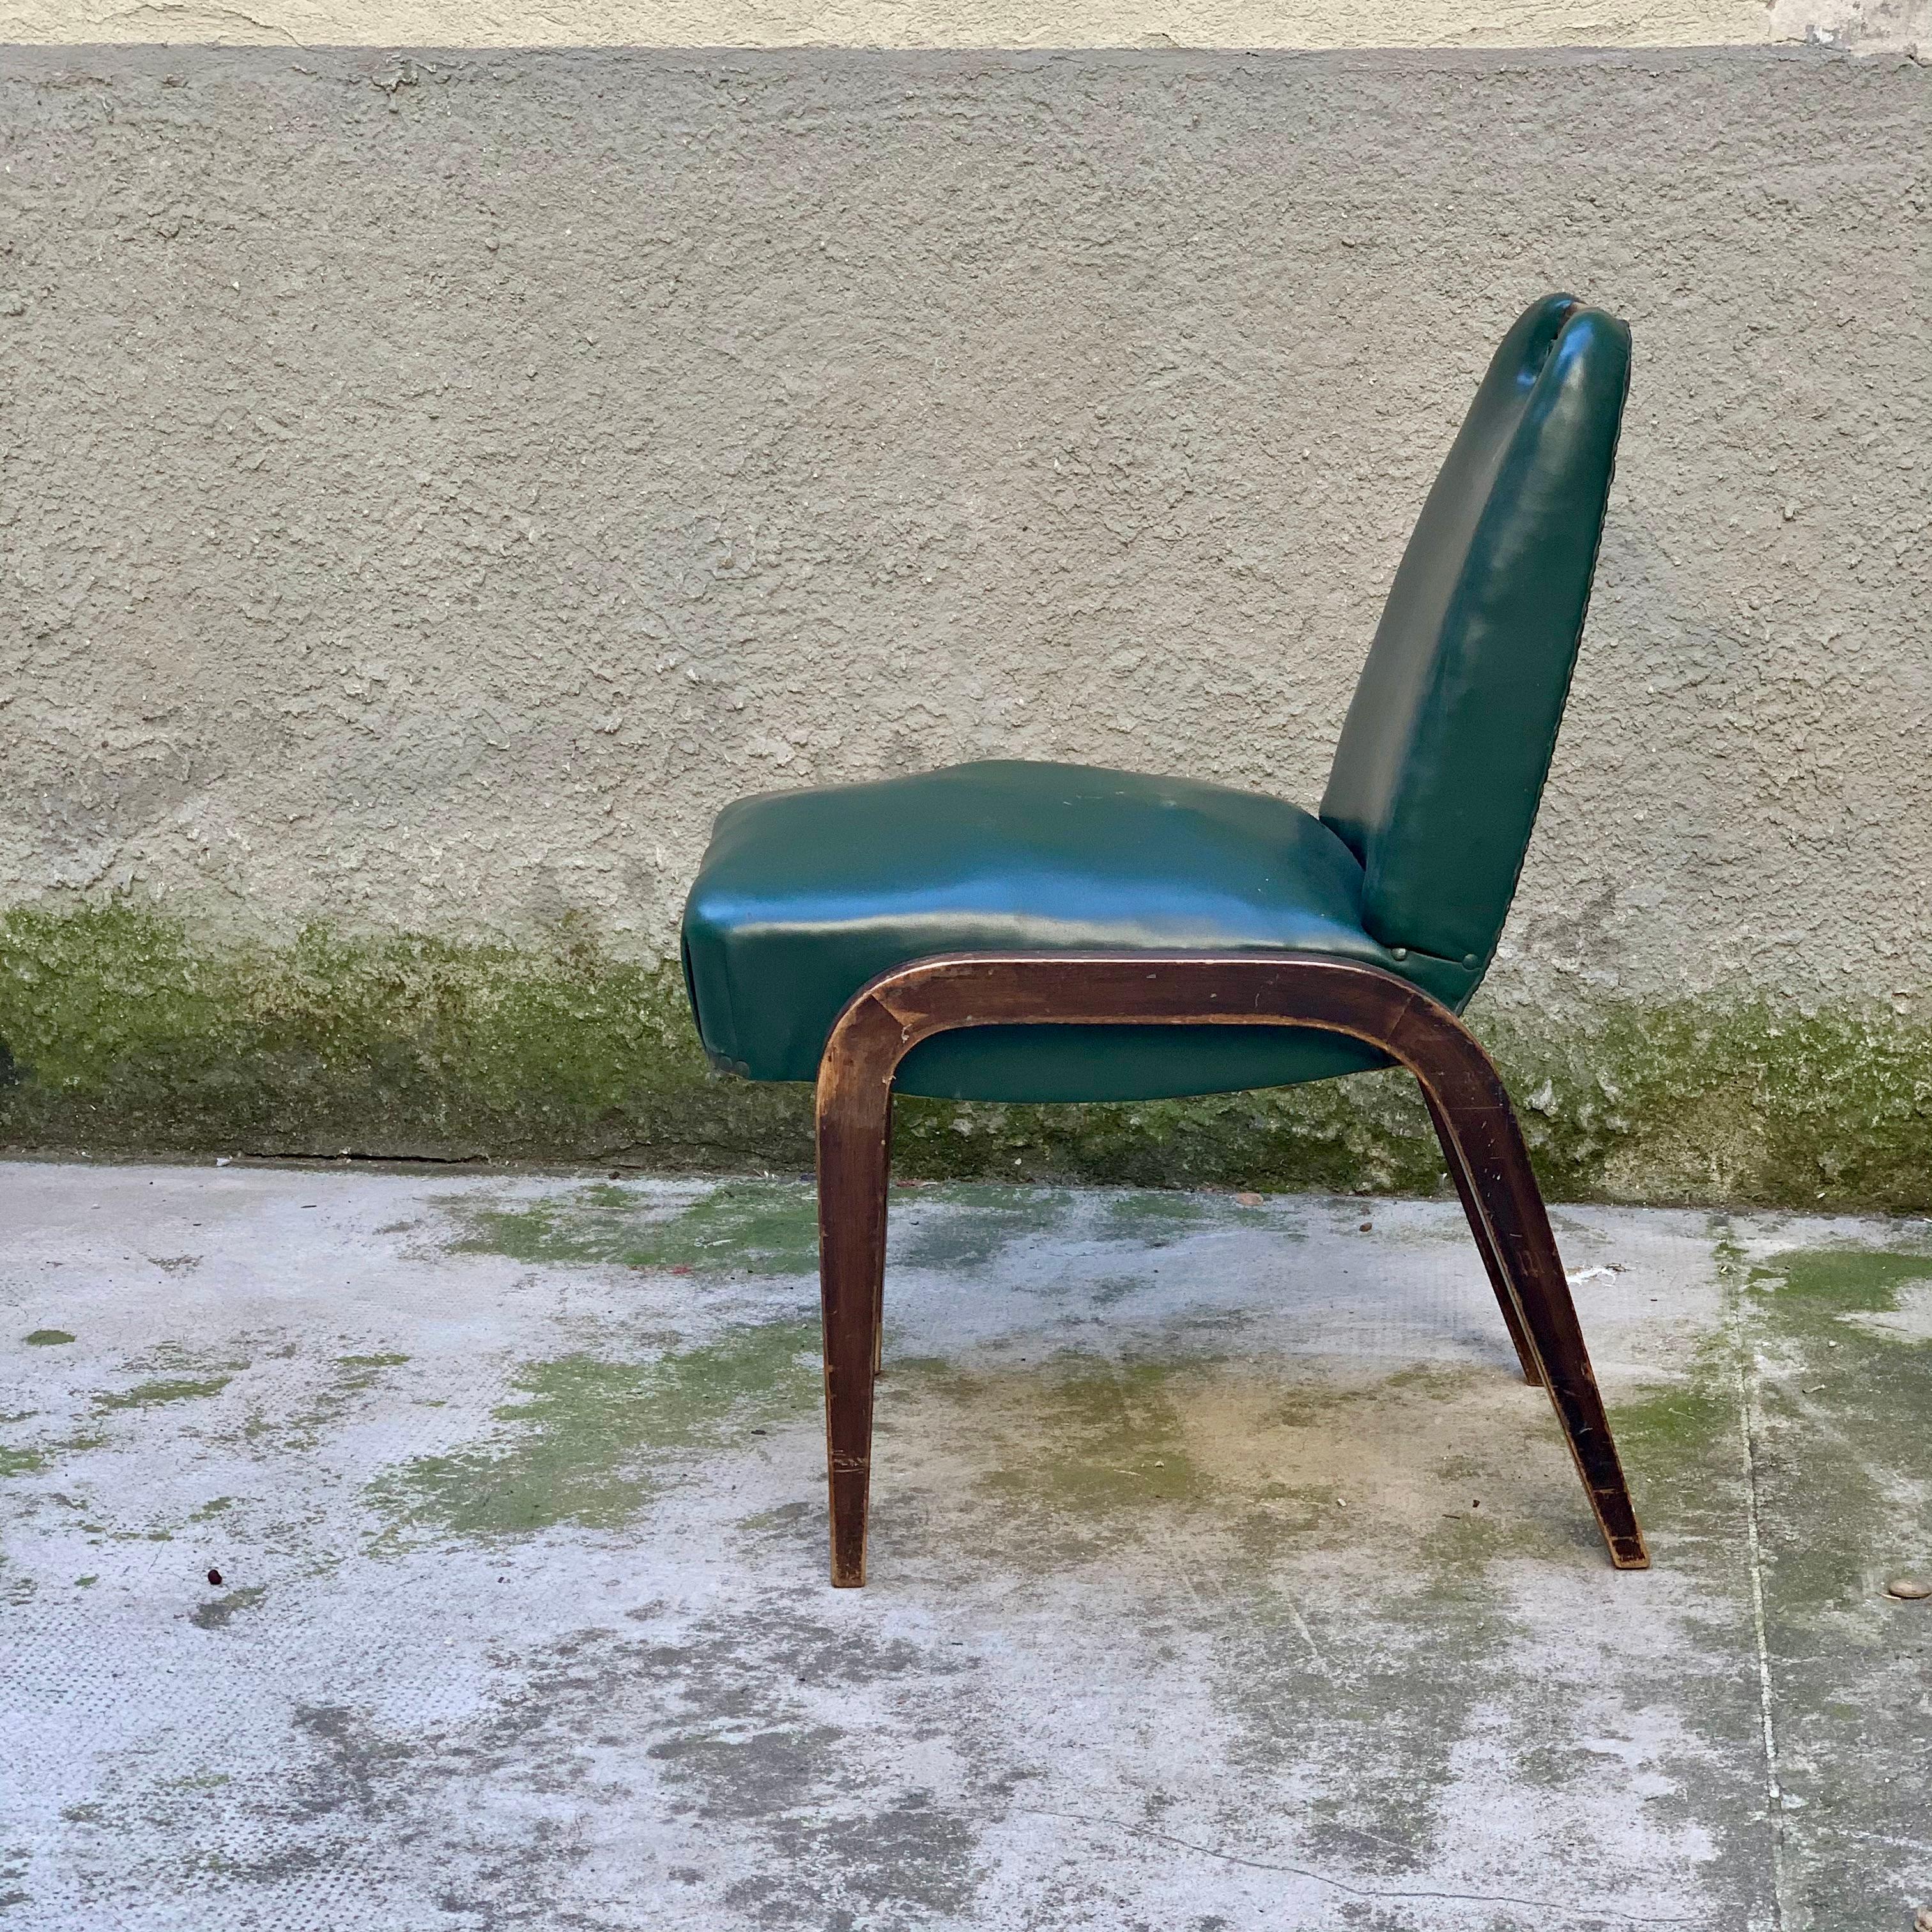 Set of 4 Wood and Leatherette Chairs - Italy - 1930s For Sale 1